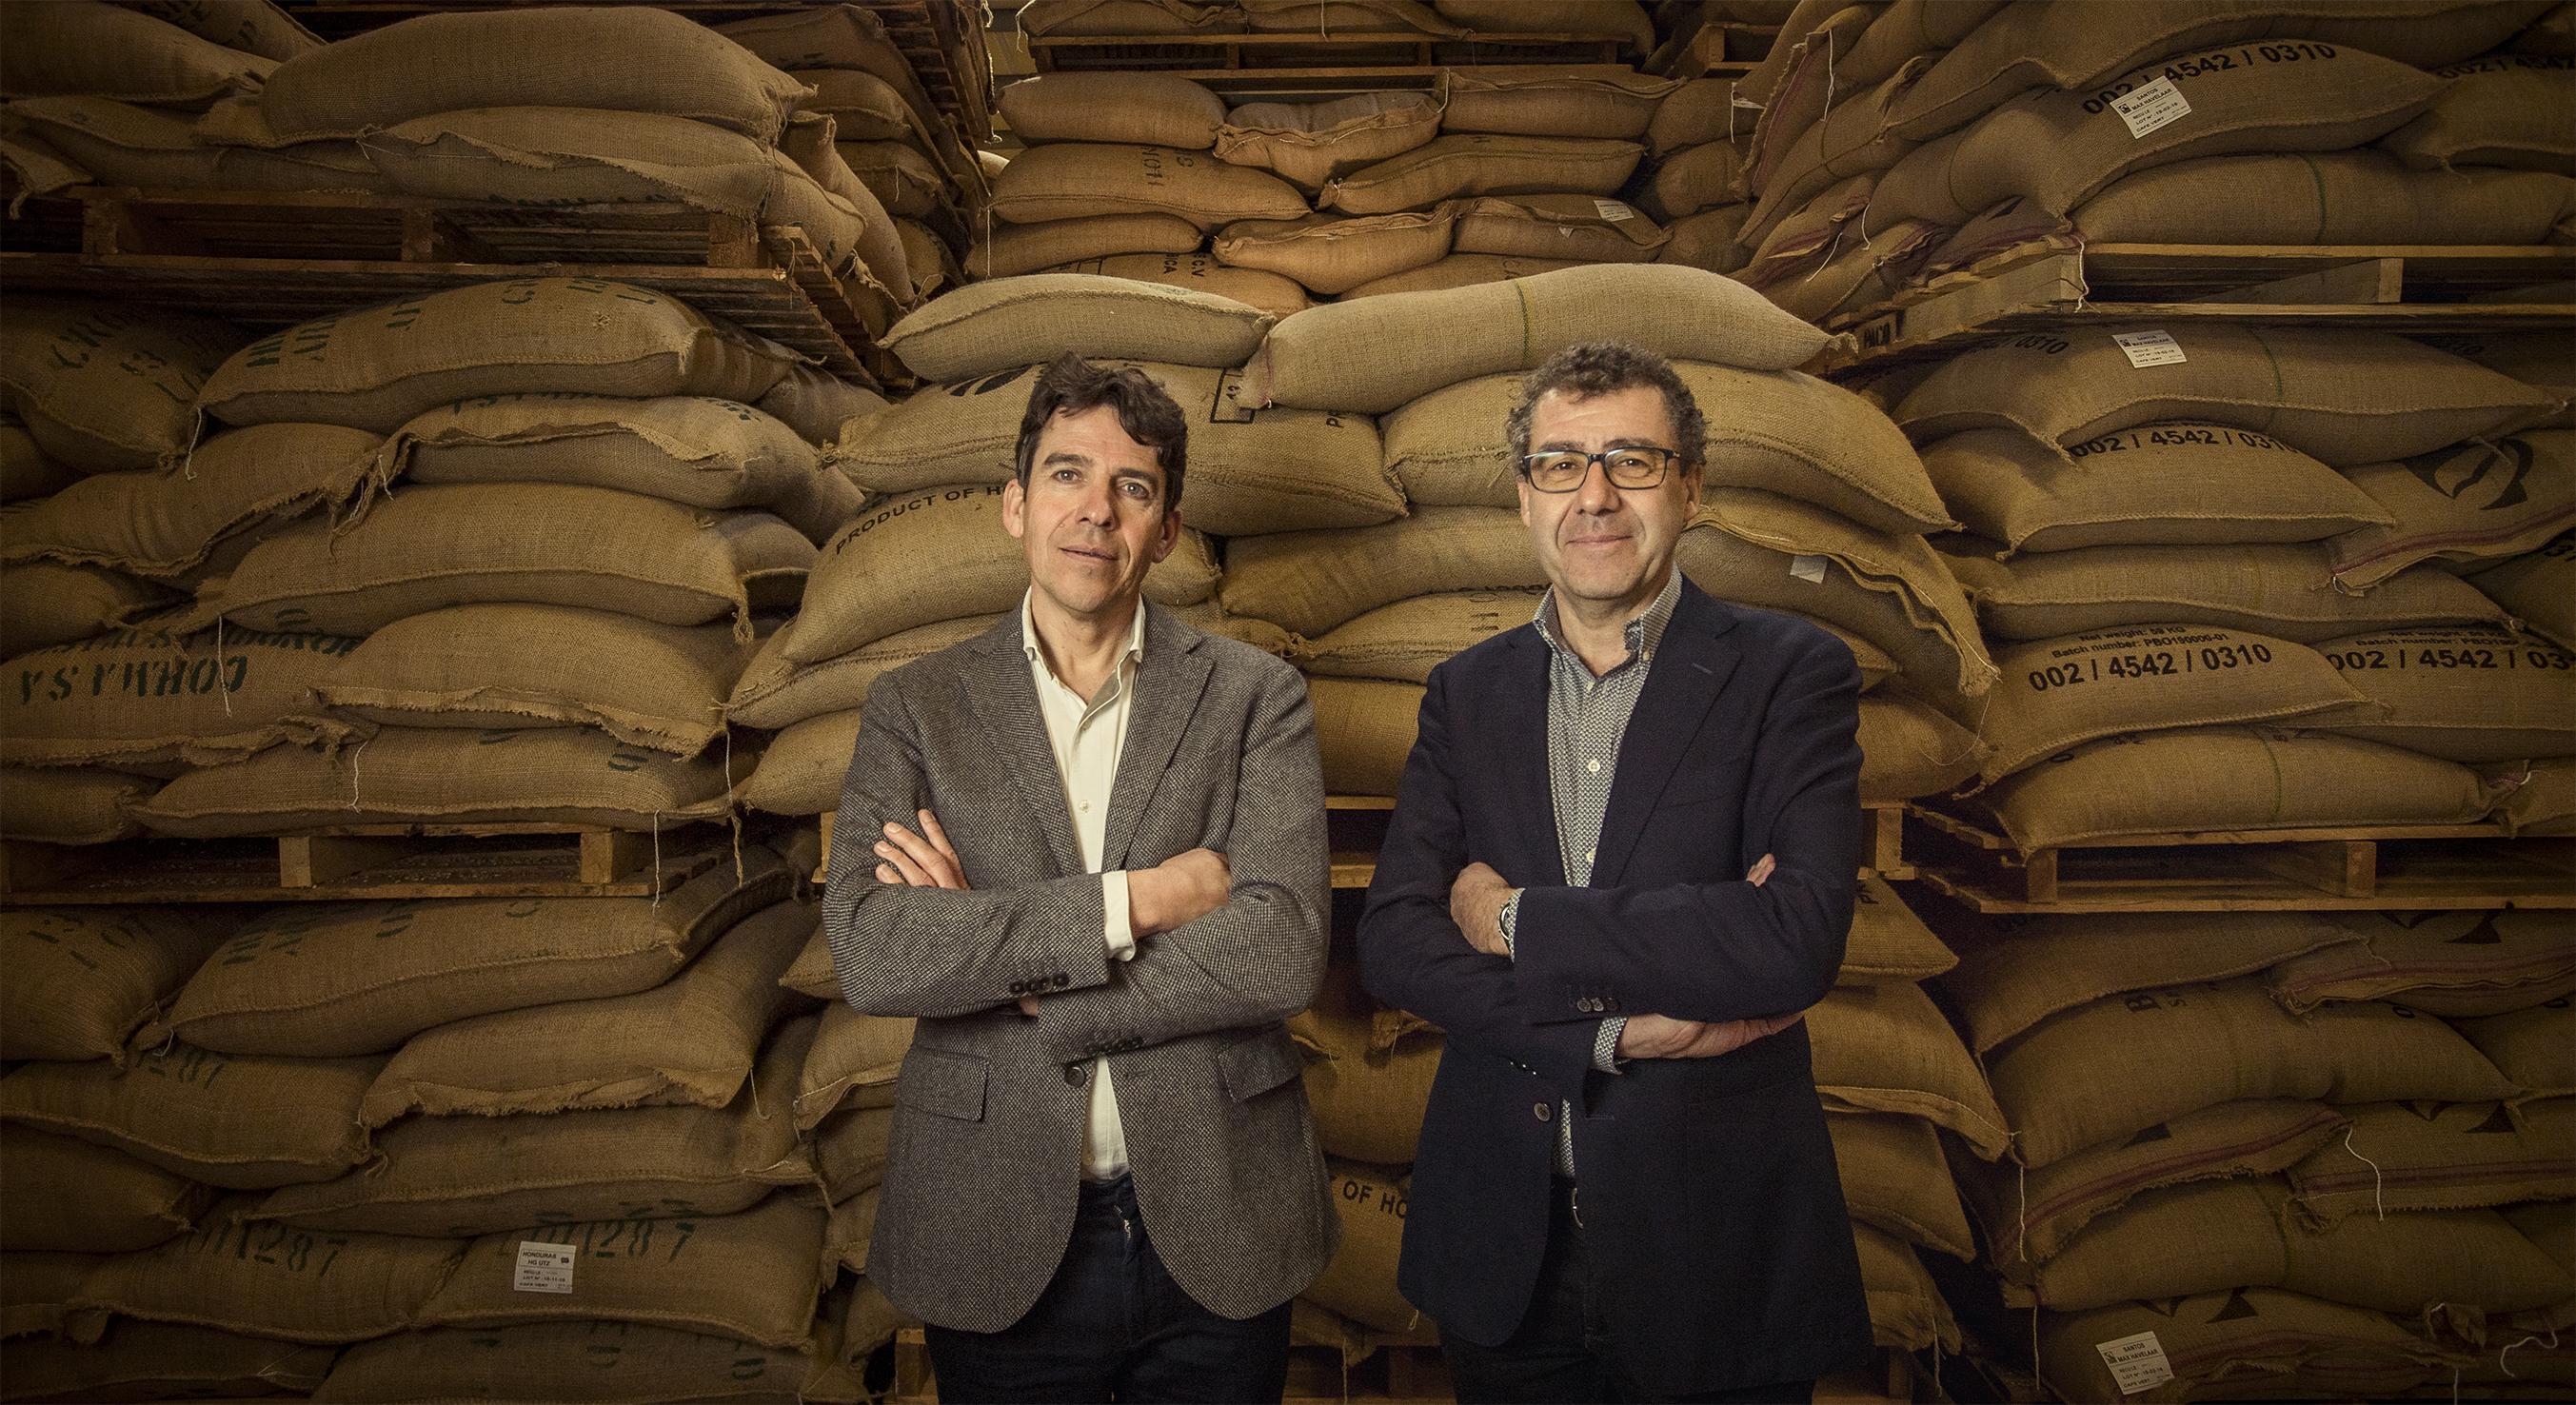 Michel and Benoit Liégeois in front of the bags of green coffee.